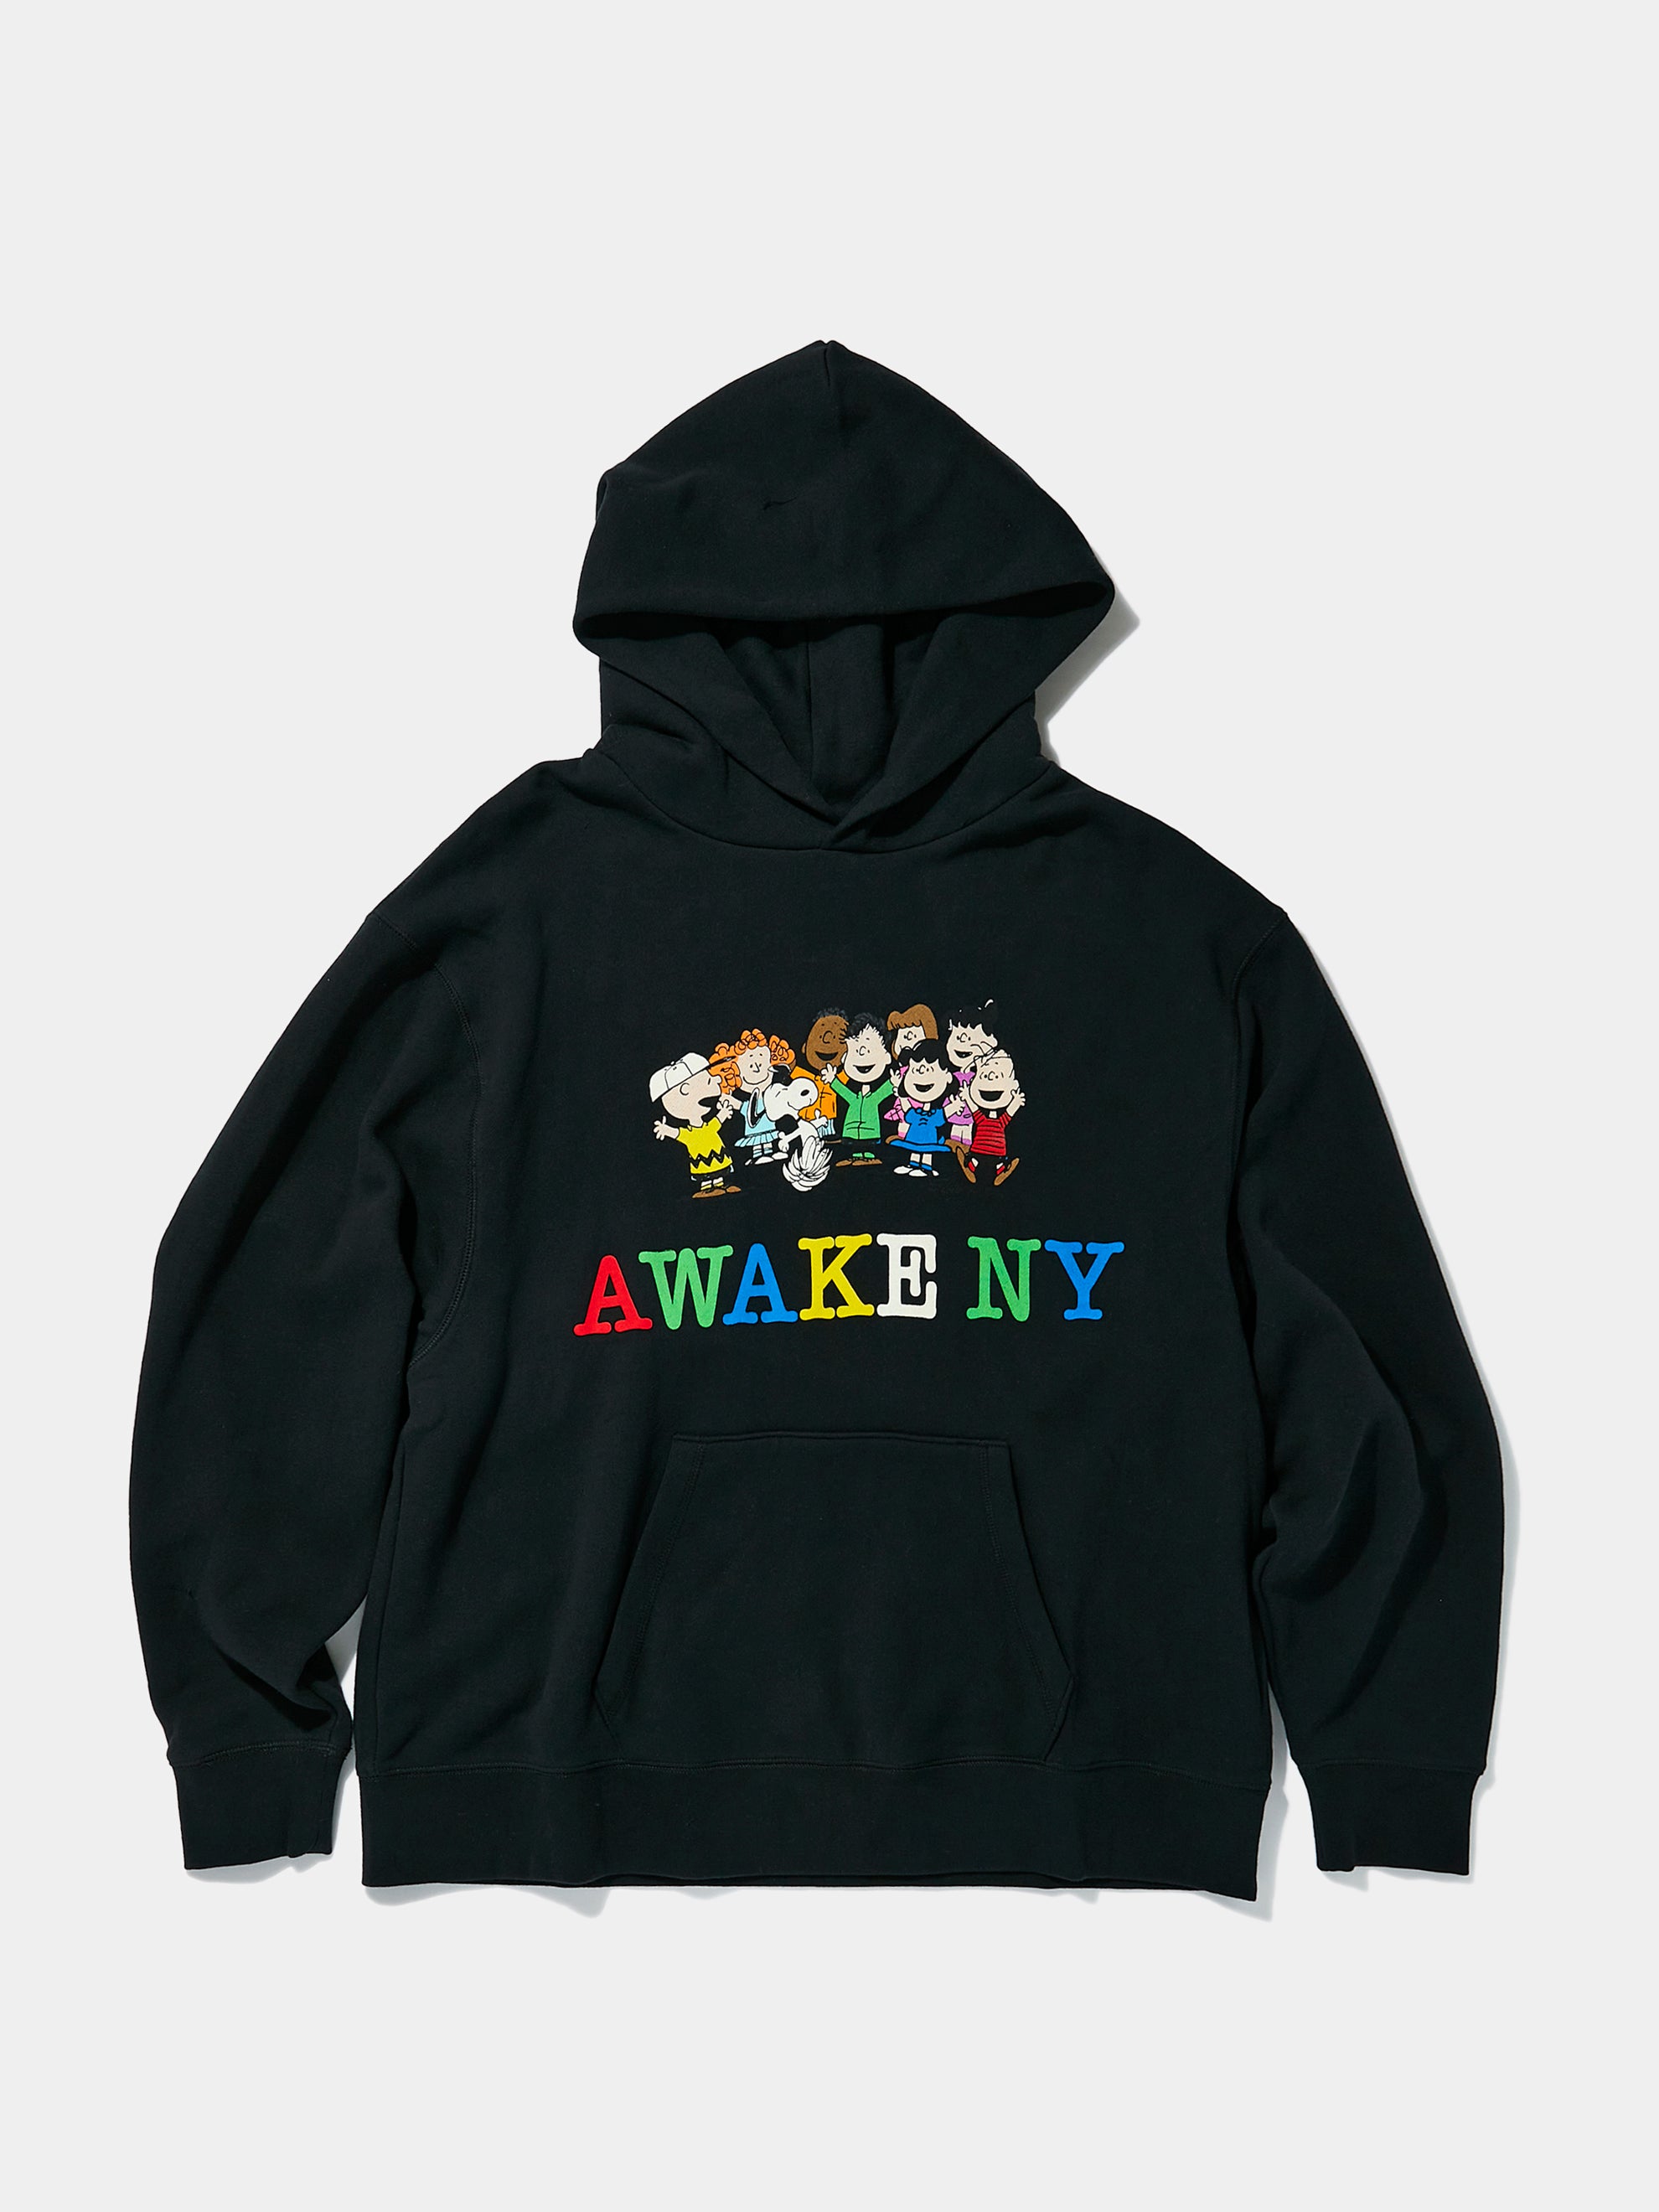 Awake NY x Wasted Youth Hoodie XL size 44%OFF